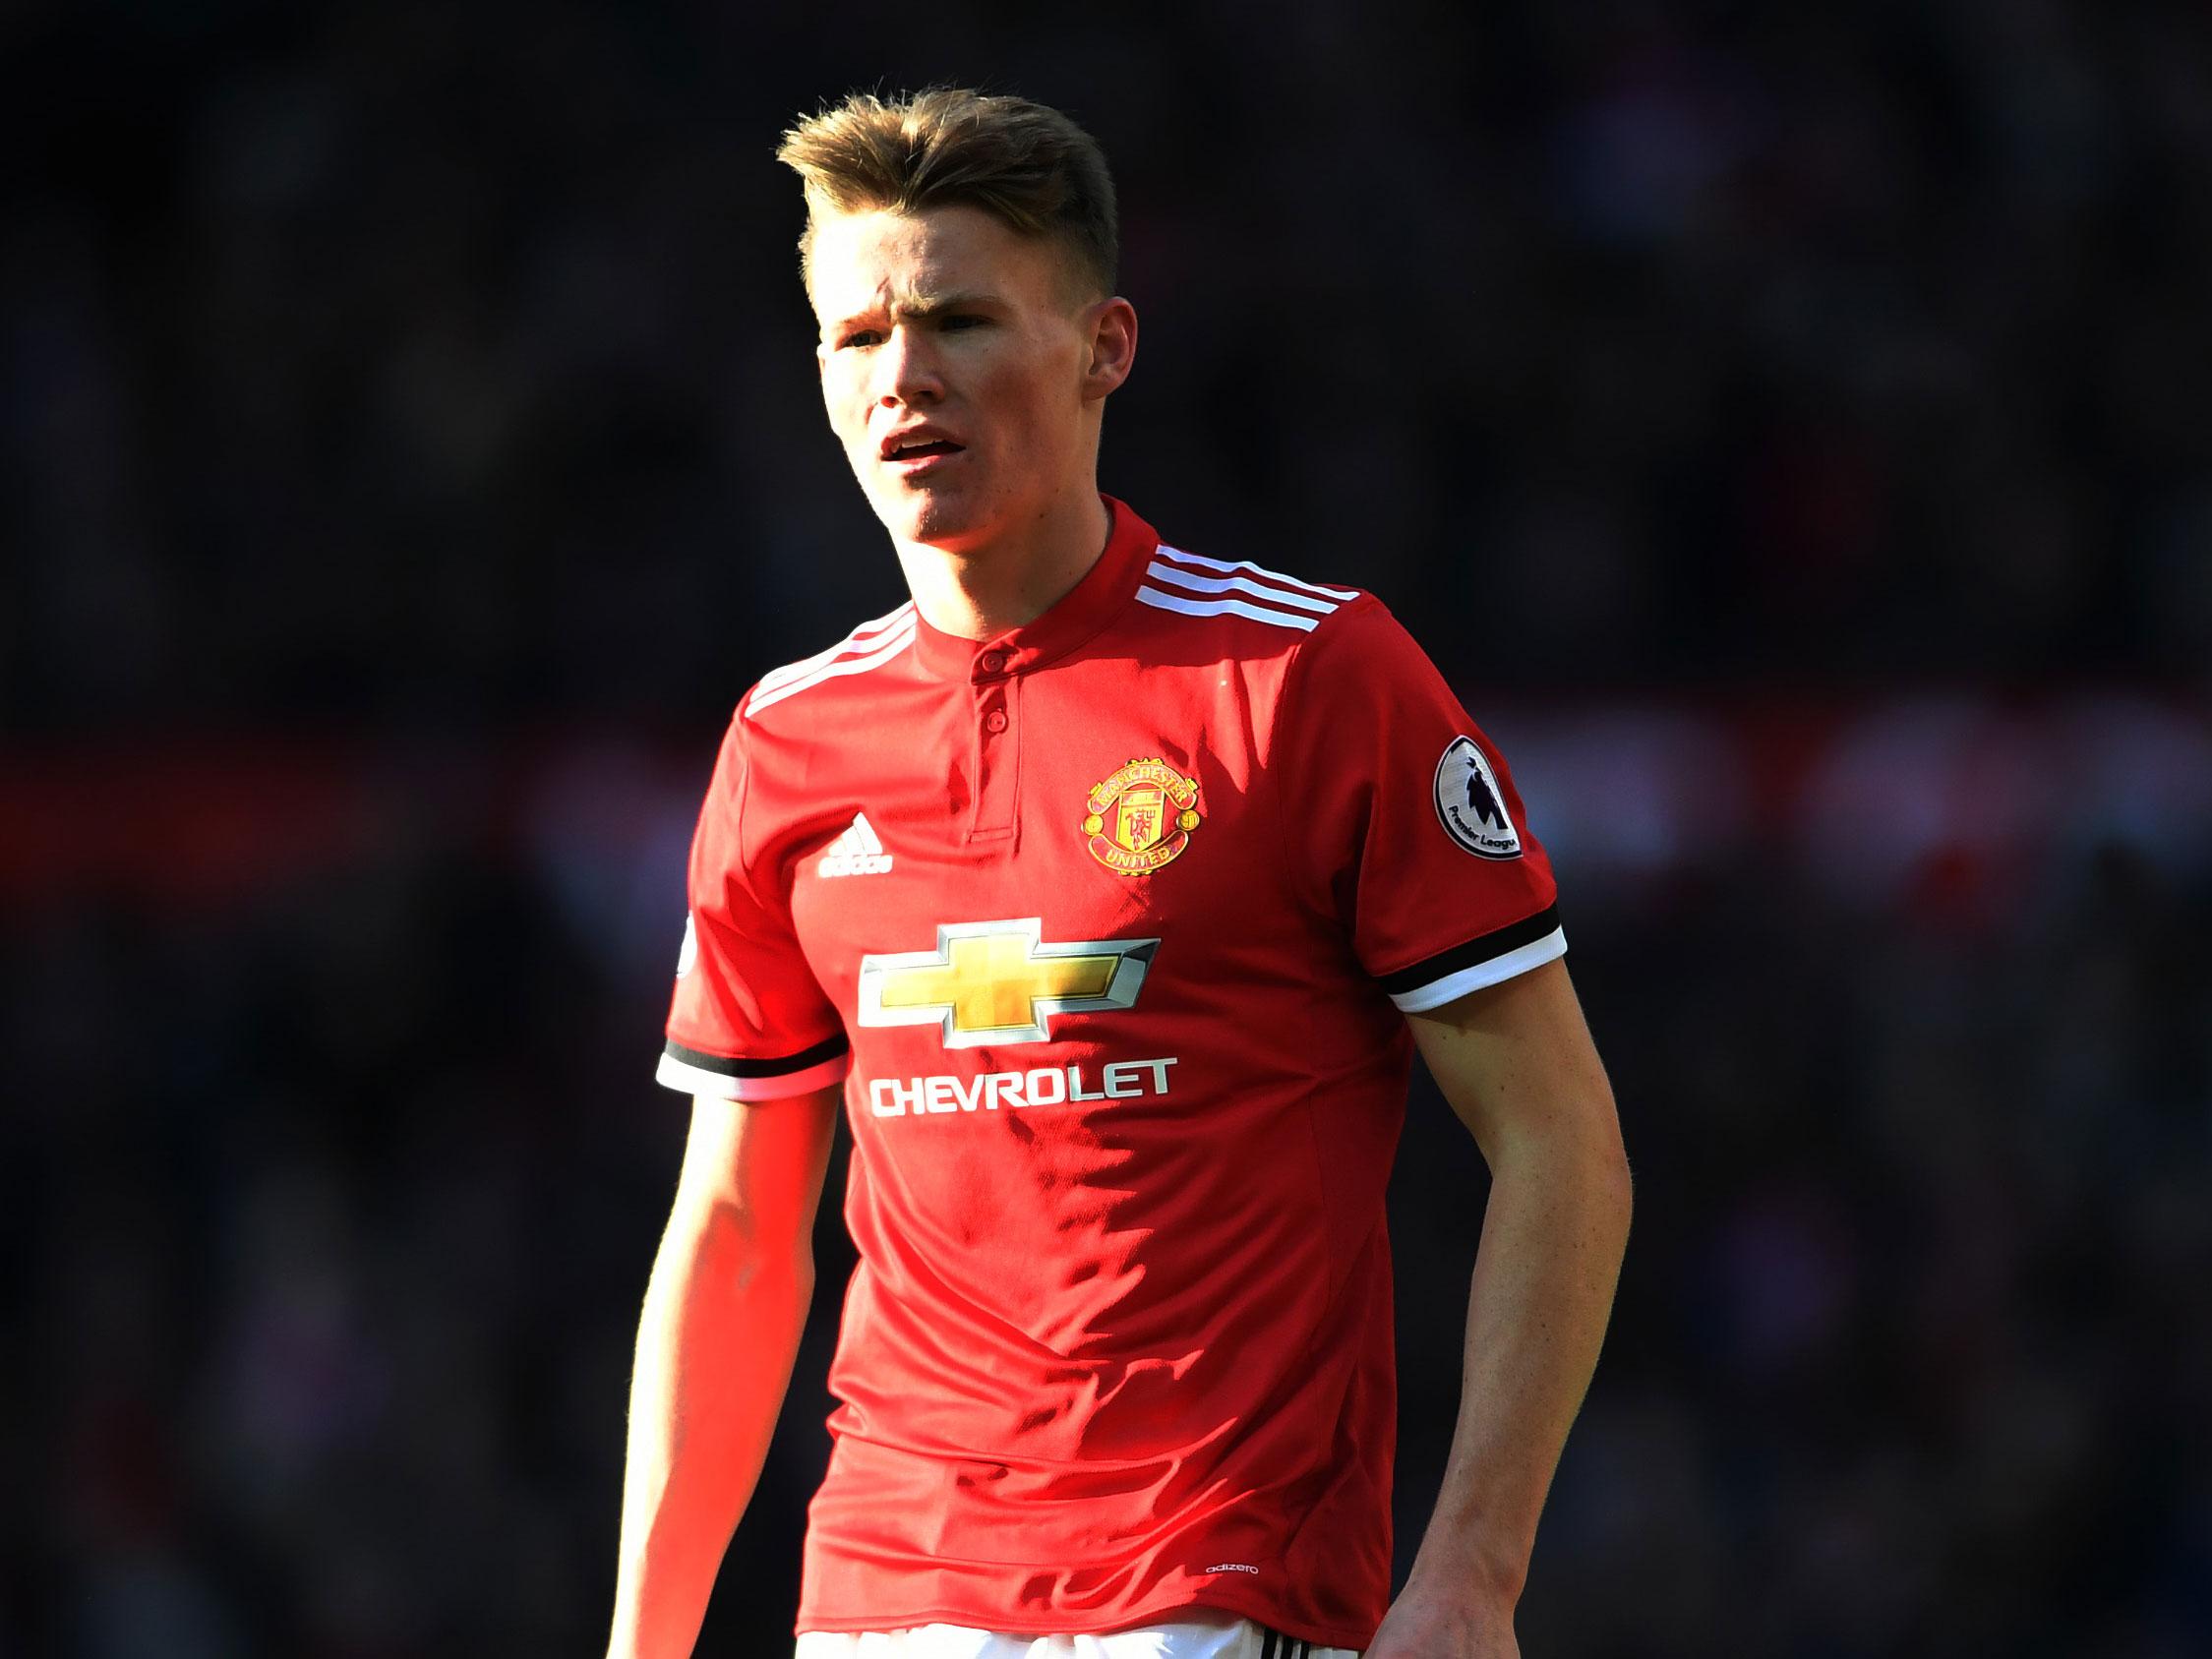 Scott McTominay has impressed since coming into Manchester United's midfield